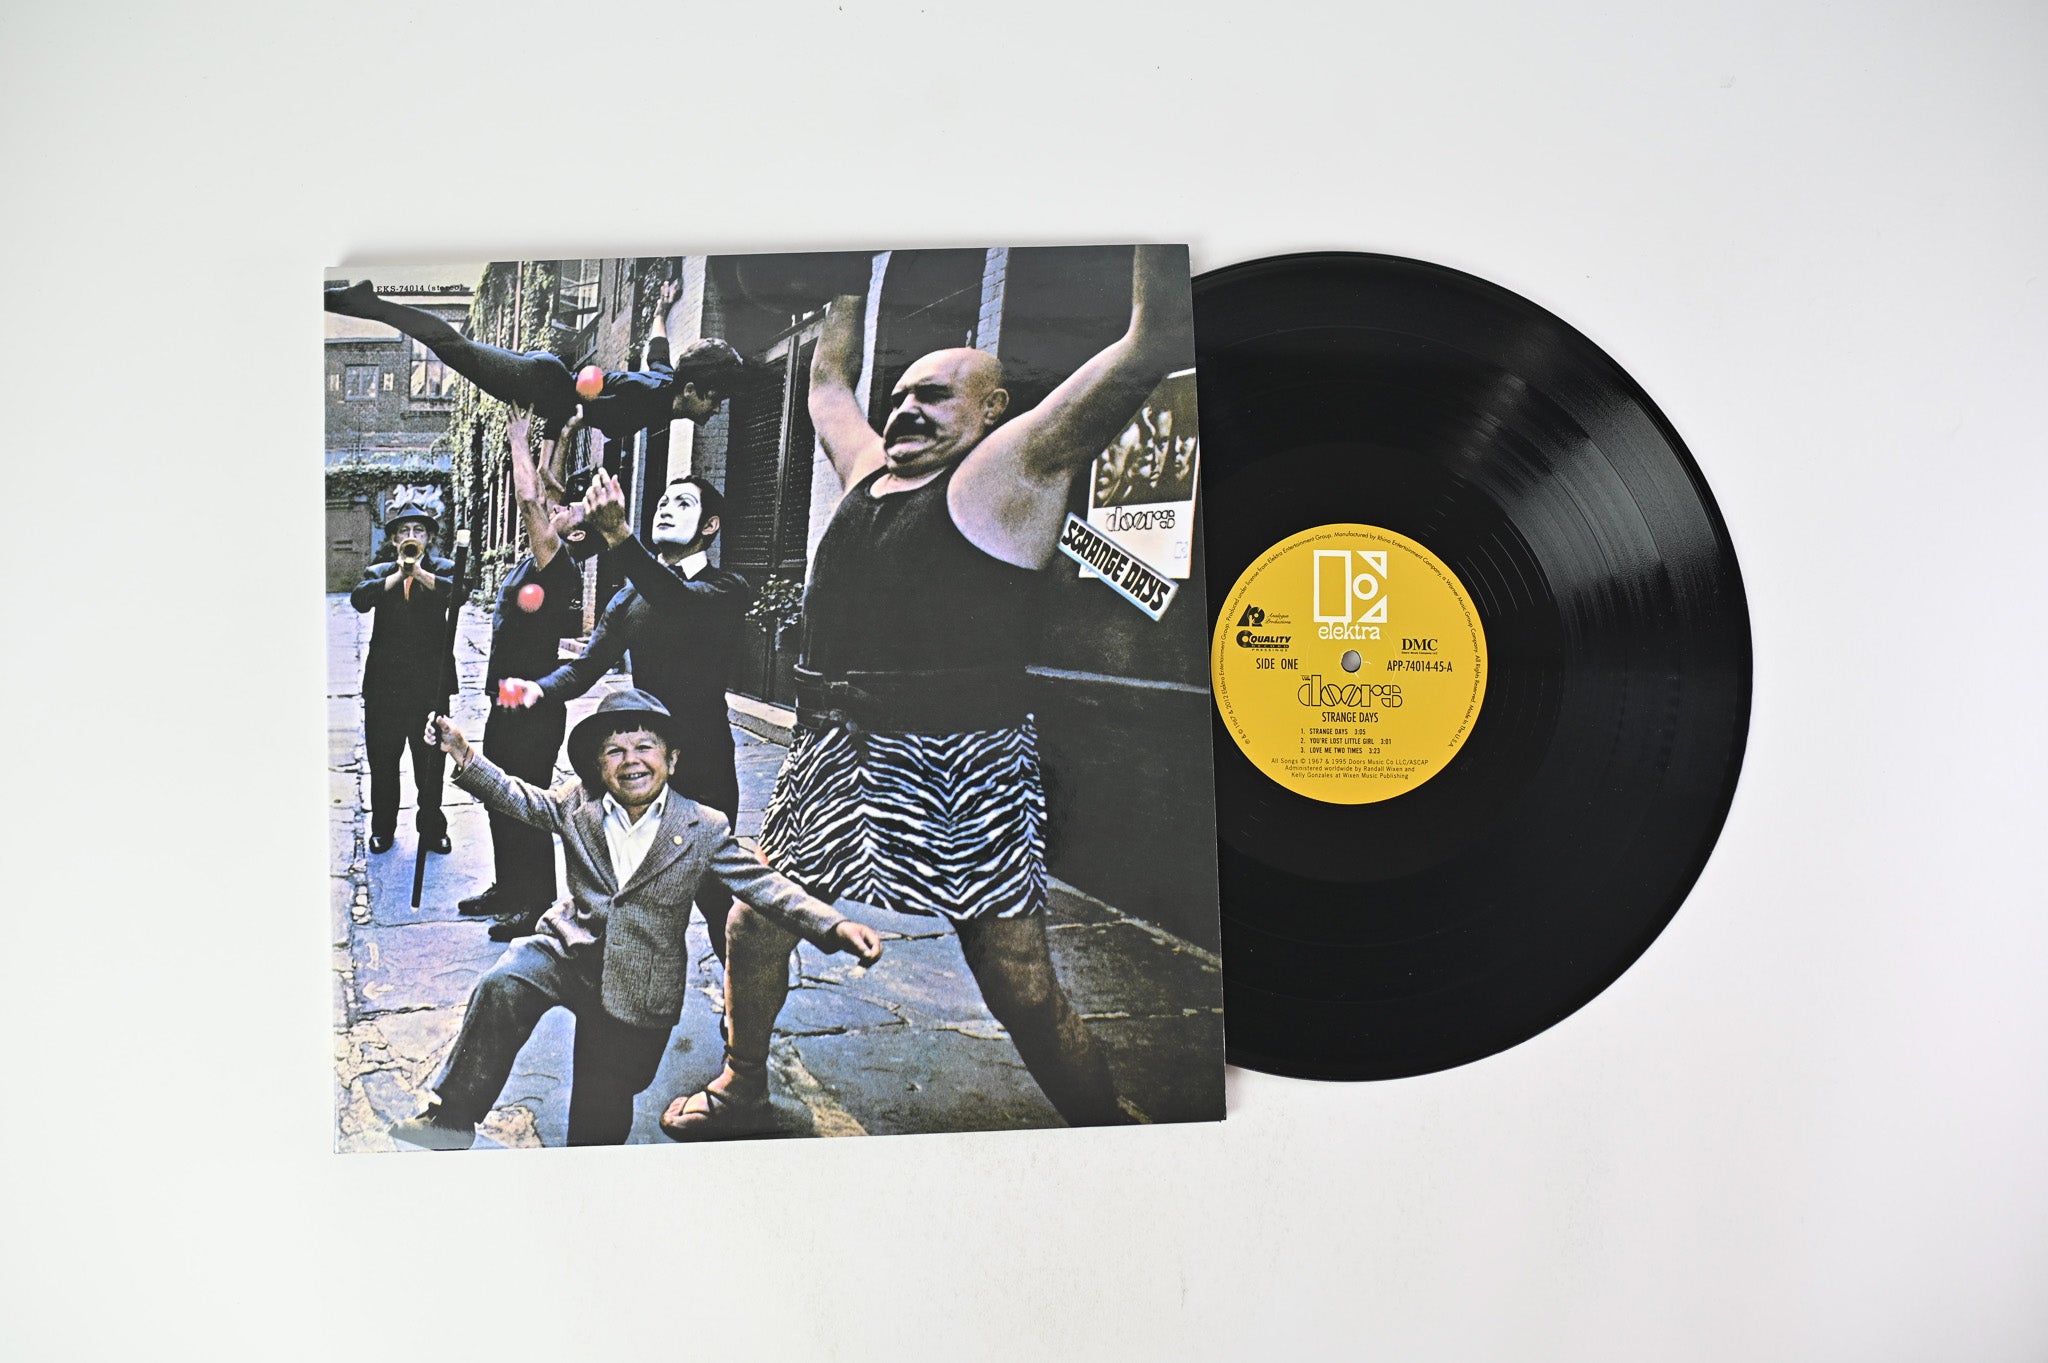 The Doors - Strange Days on Analogue Productions 45 RPM 200 Gram Reissue